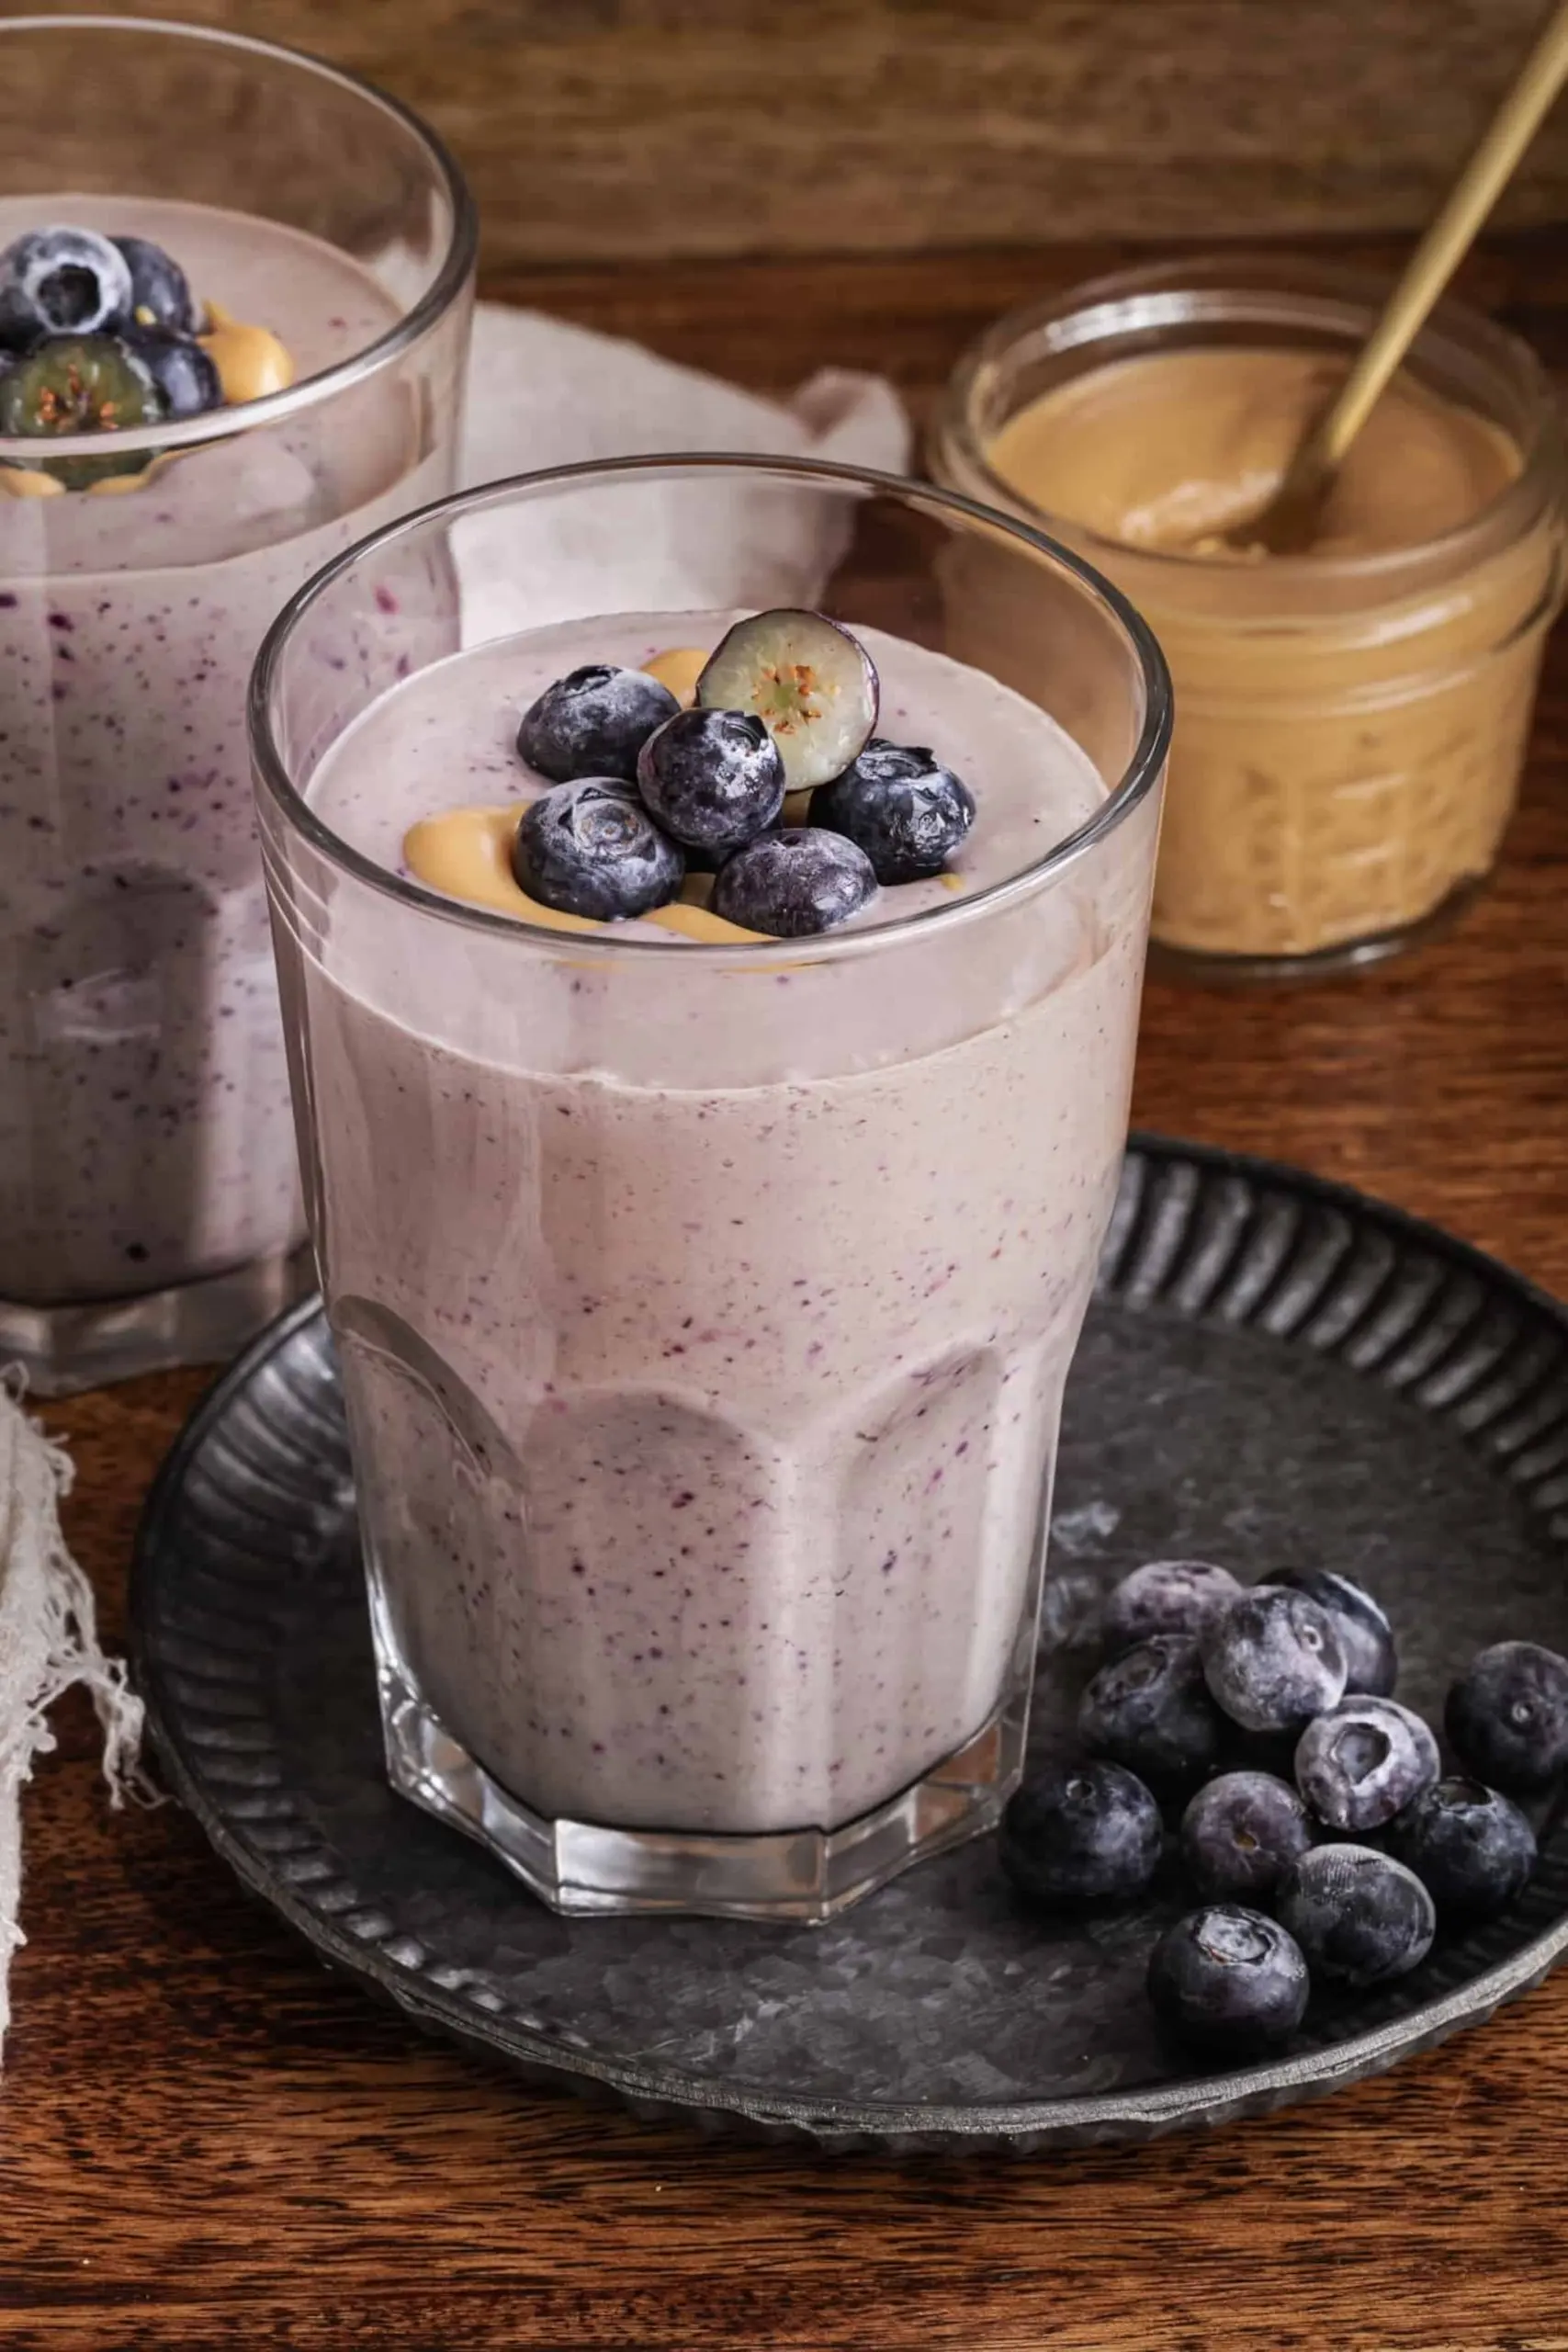 PHOTO: A peanut butter and jelly-inspired smoothie.